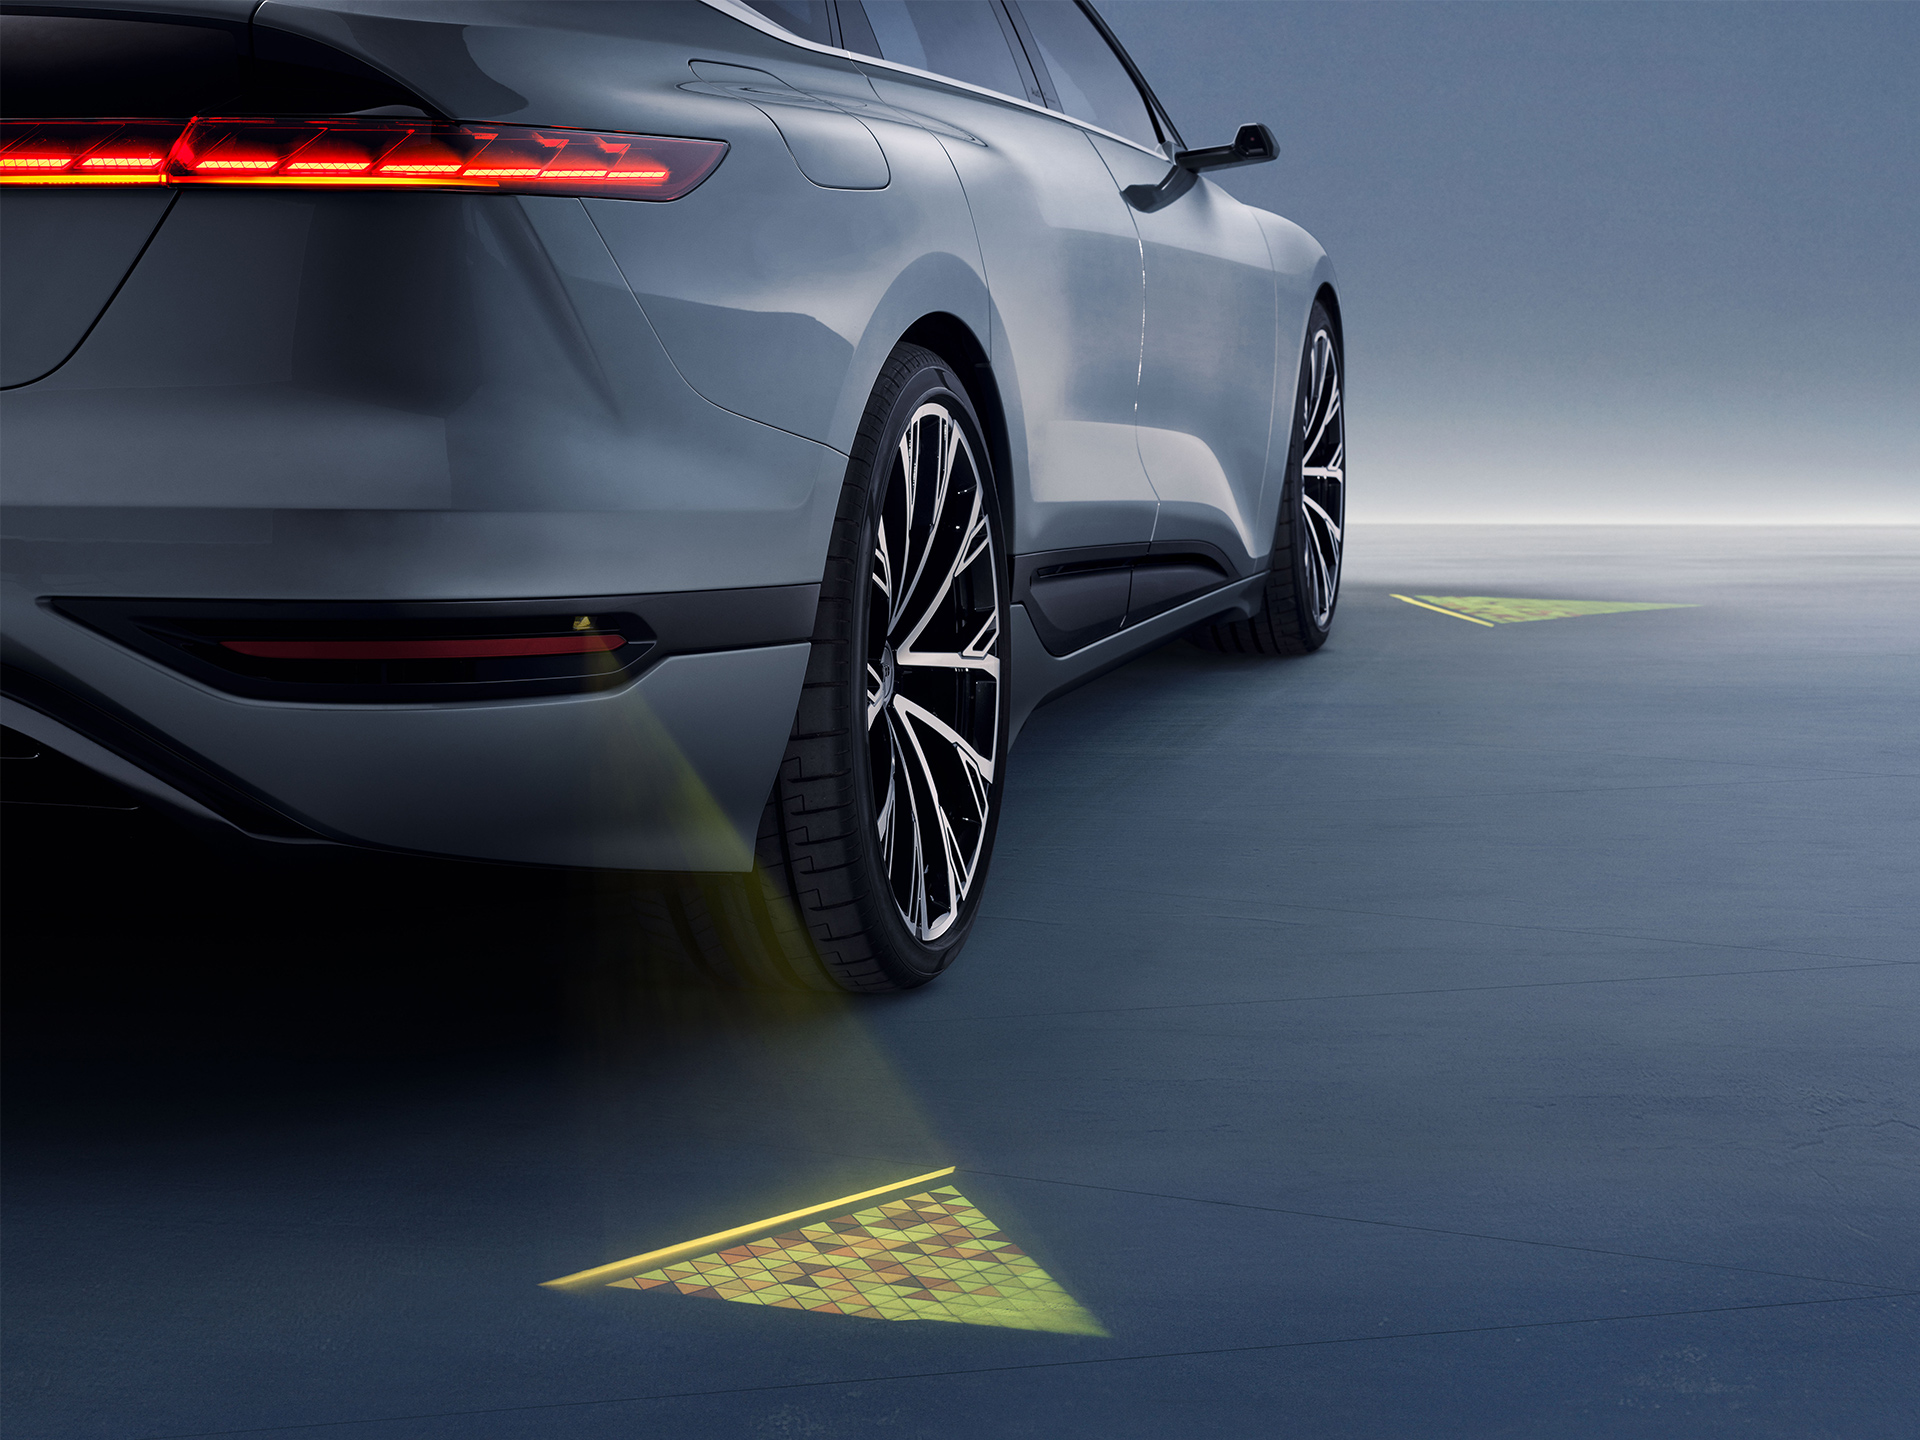 LED projectors on the vehicle create glowing triangles on the ground. 